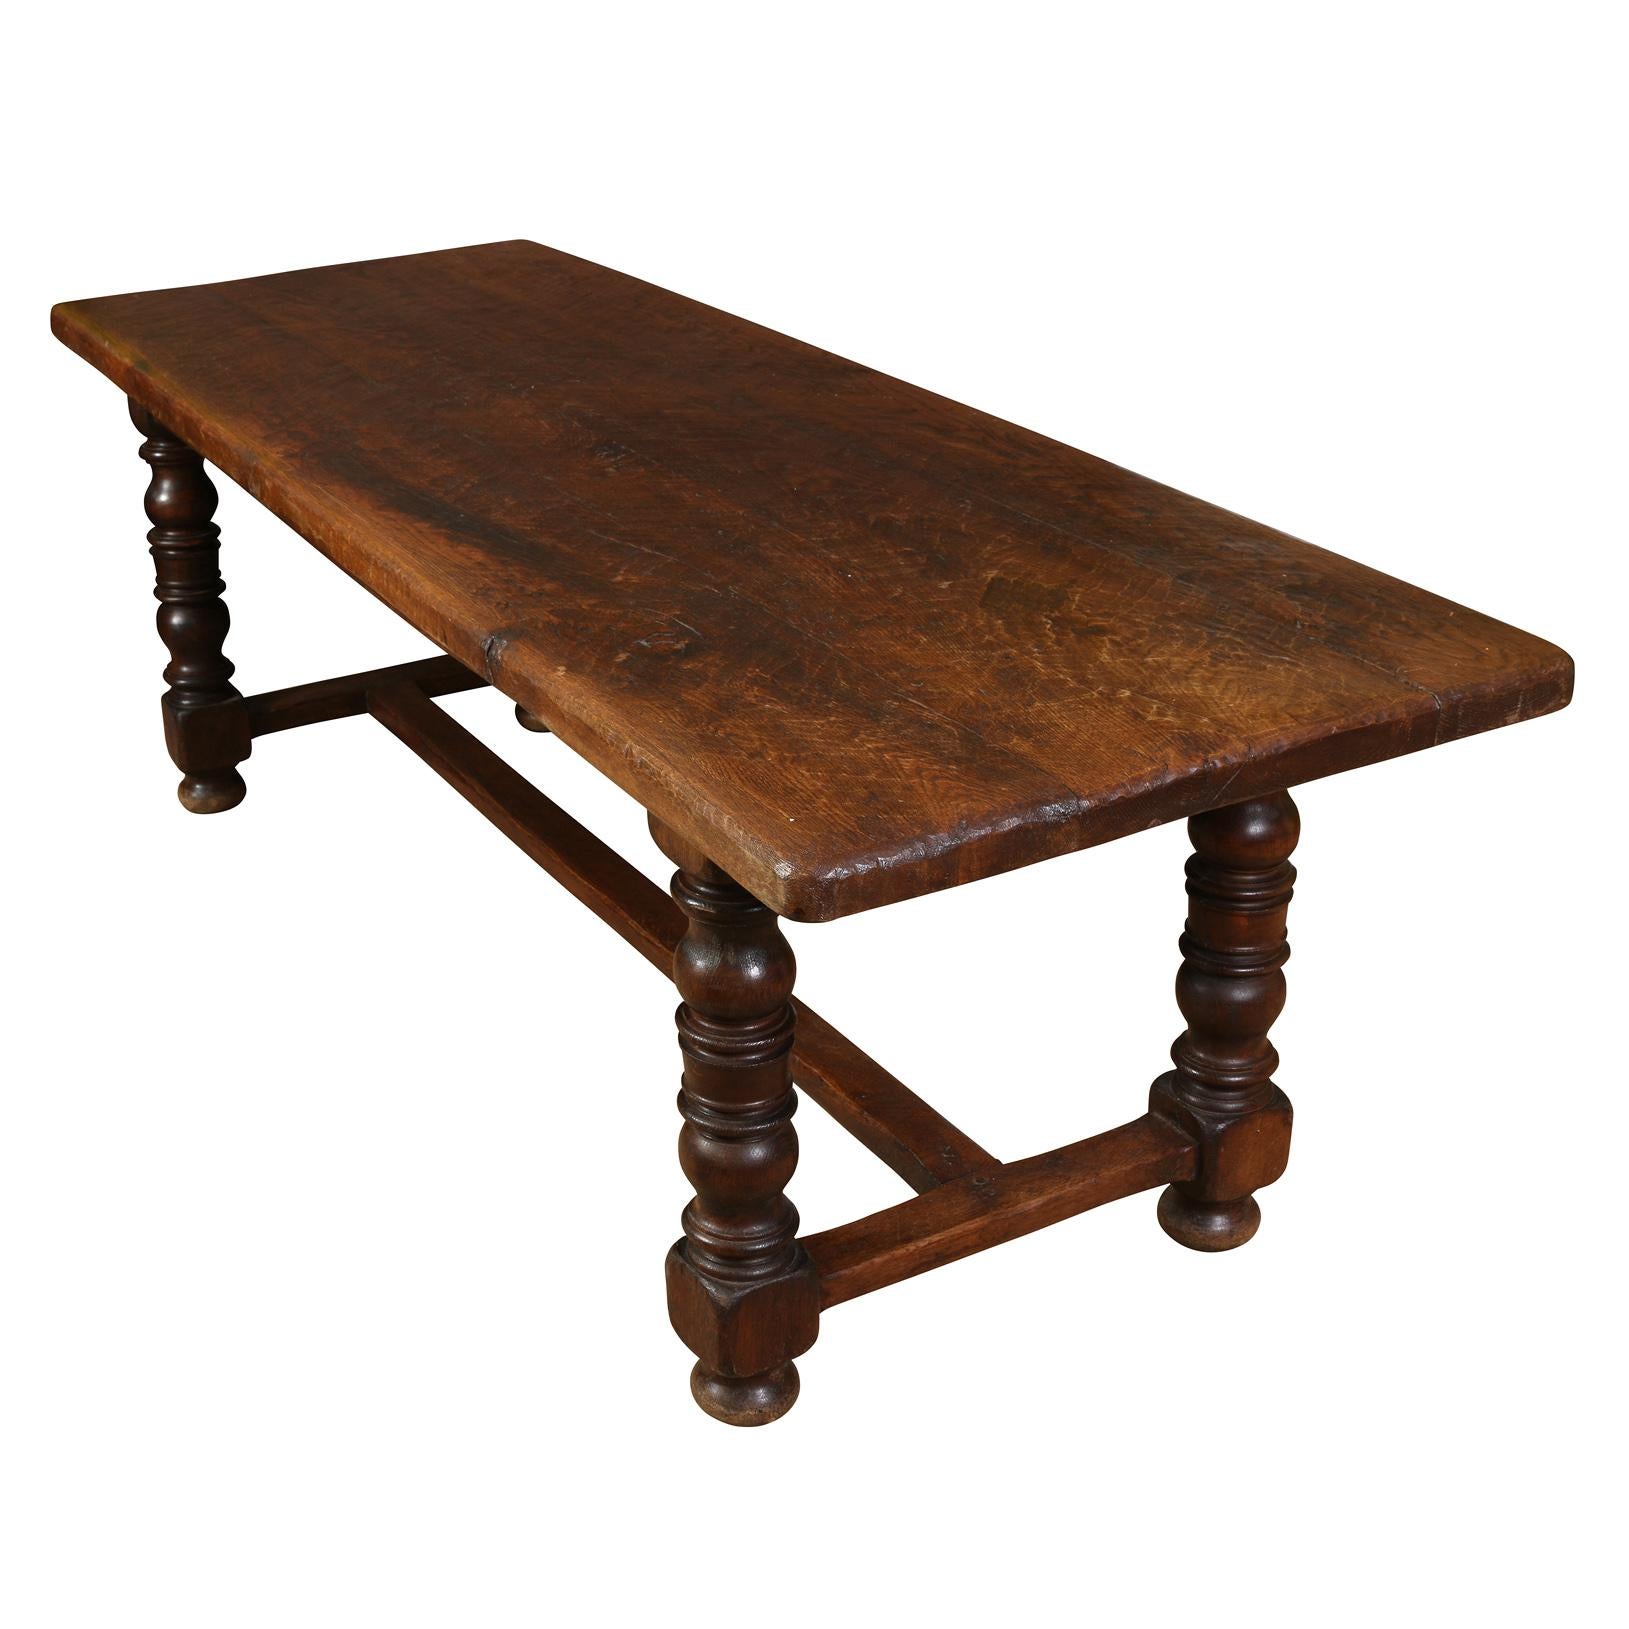 This table will add star quality to any room.  Crafted of dark oak, the table has generous turned legs joined by a stretcher.  The top has slightly rounded corners and the finish has aged to a beautiful warm patina, only achieved with the passage of